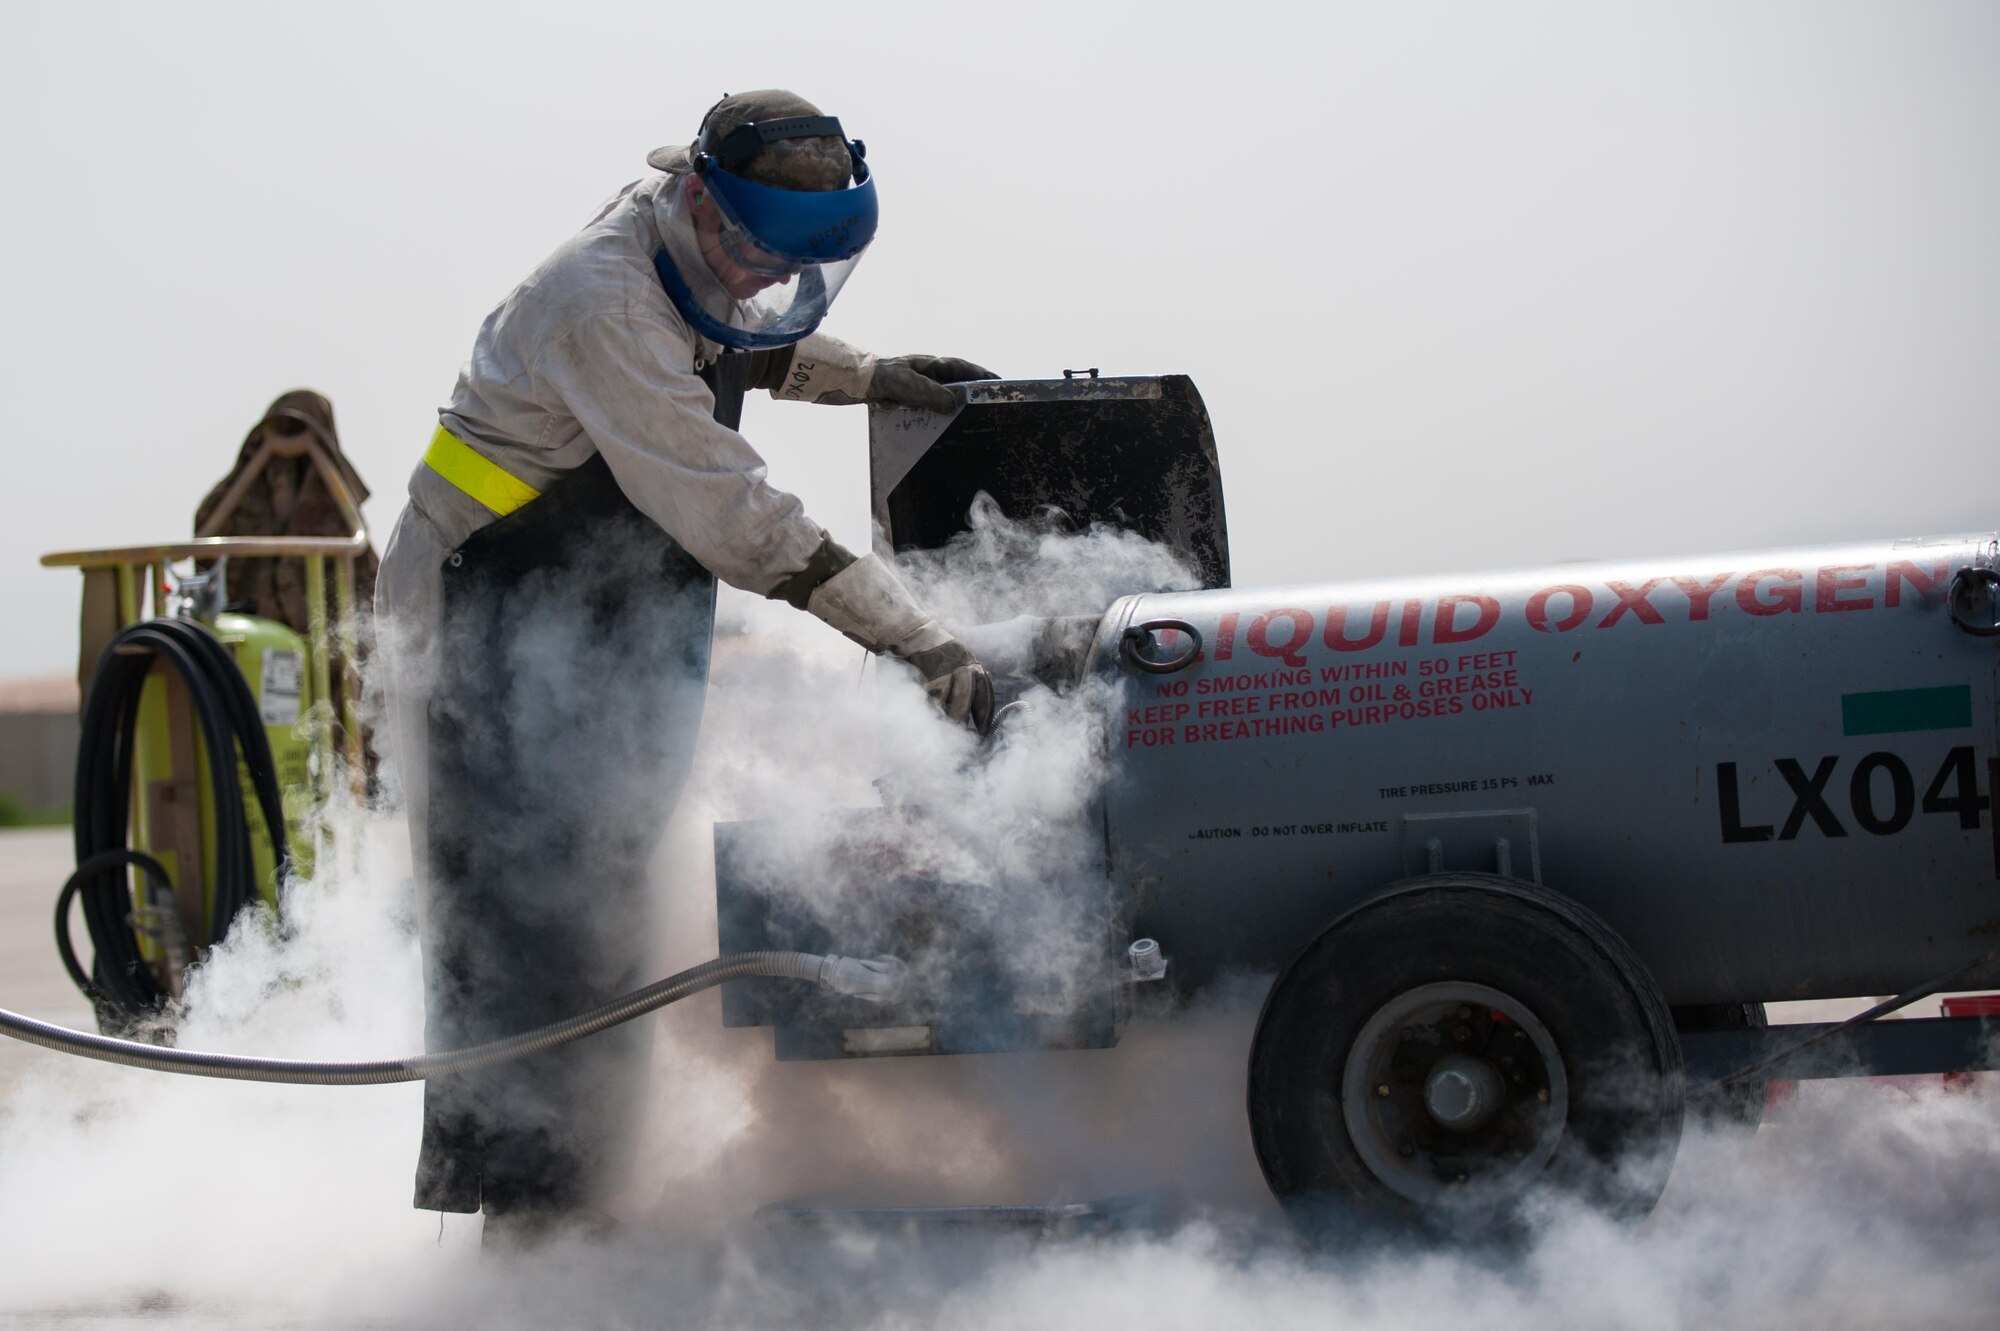 U.S. Air Force Airman 1st Class Ryan Munchel, assigned to the 455th Expeditionary Aircraft Maintenance Squadron, transfers liquid oxygen to an LOX reservoir in a C-130J Super Hercules aircraft on the flight line at Bagram Airfield, Afghanistan, May 5, 2015.  The 455th EAMXS ensure Super Hercules on Bagram are prepared for flight and return them to a mission-ready state once they land. (U.S. Air Force photo by Tech. Sgt. Joseph Swafford/Released)